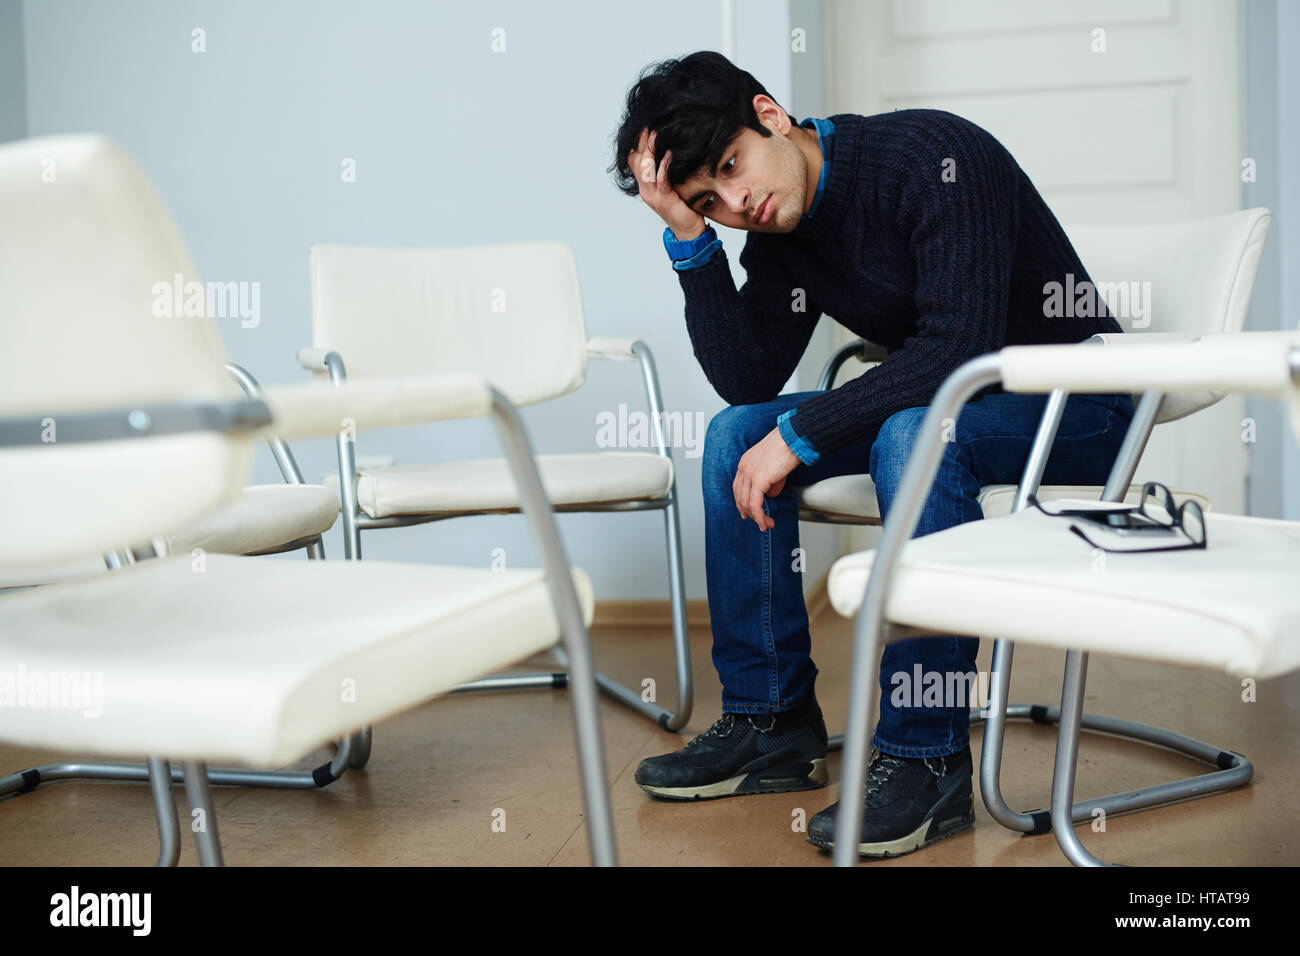 Adolescent man sitting on chair and touching his head Stock Photo